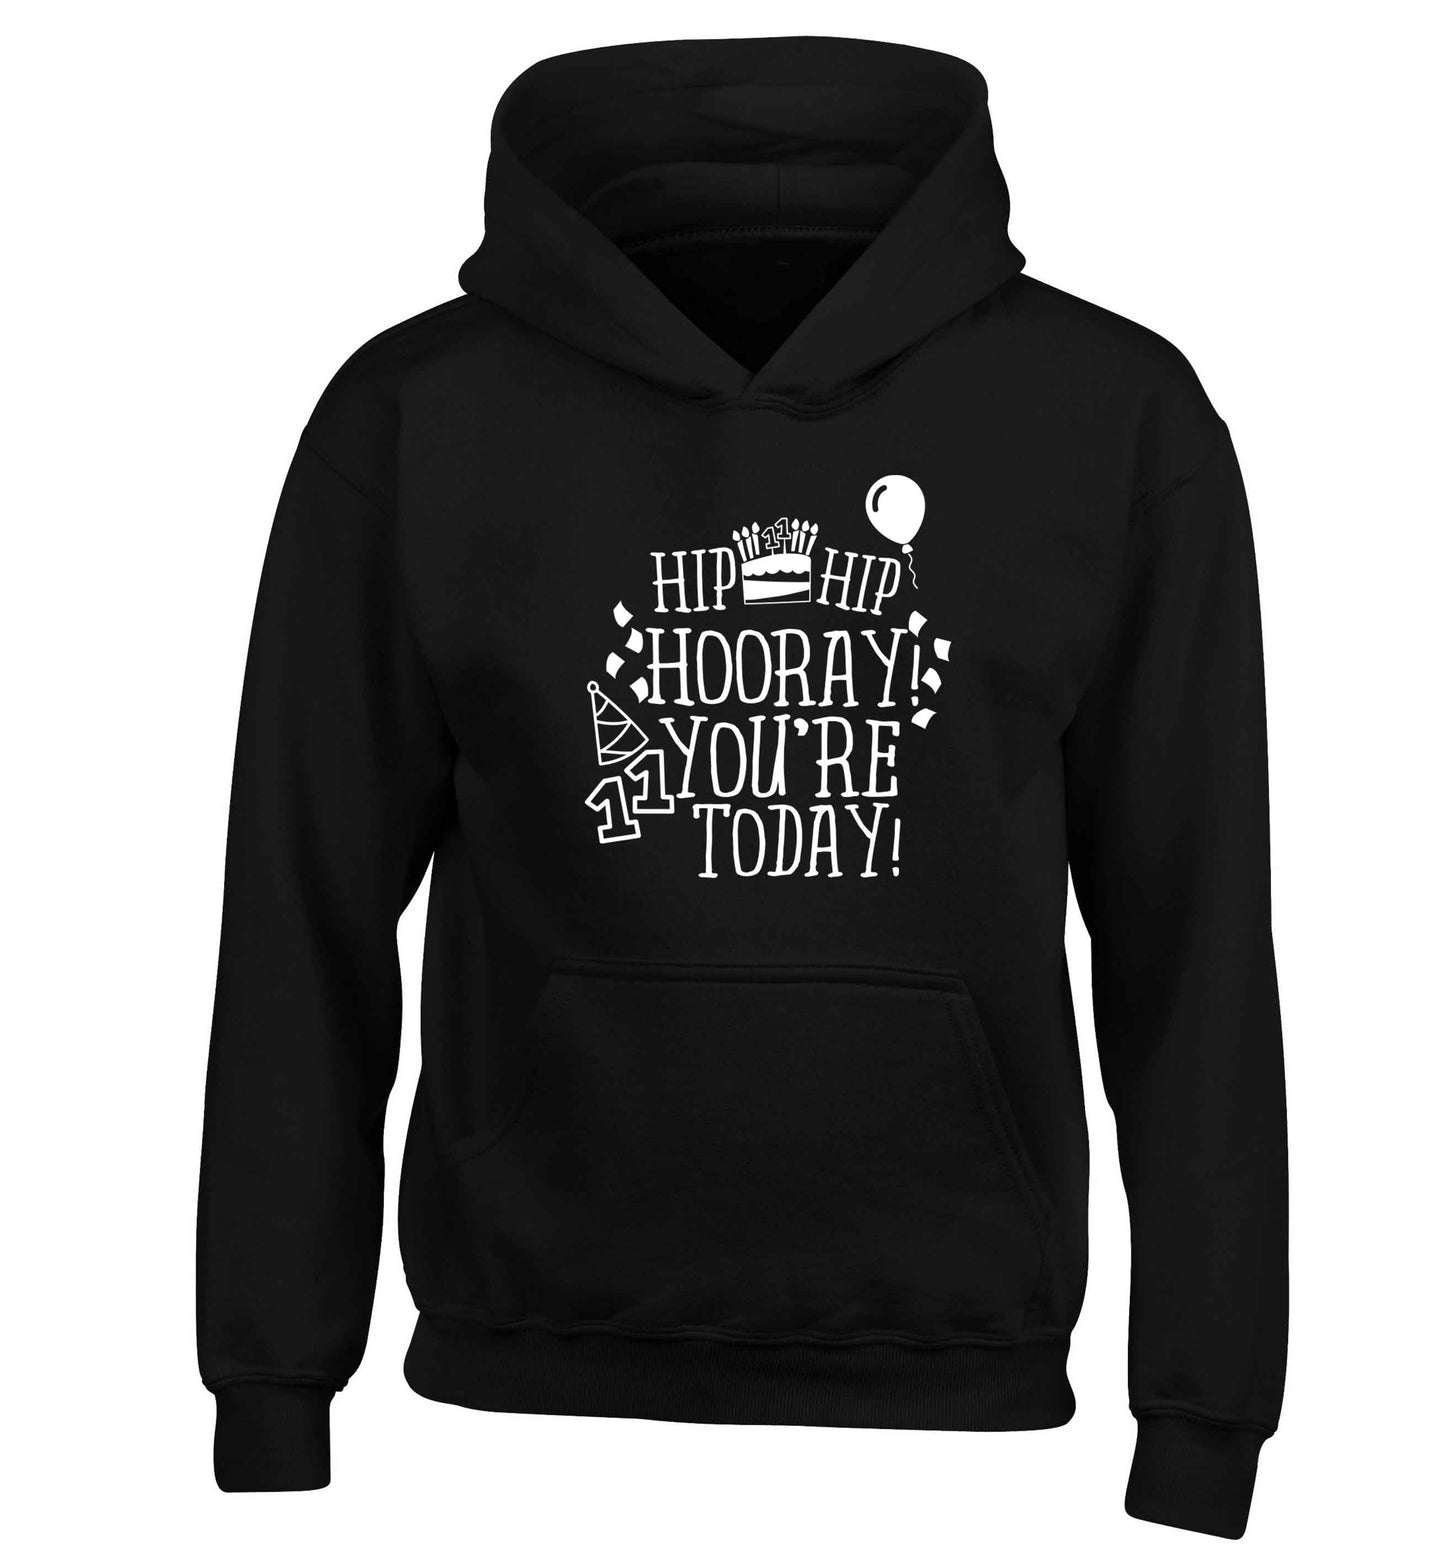 Hip hip hooray I you're eleven today! children's black hoodie 12-13 Years